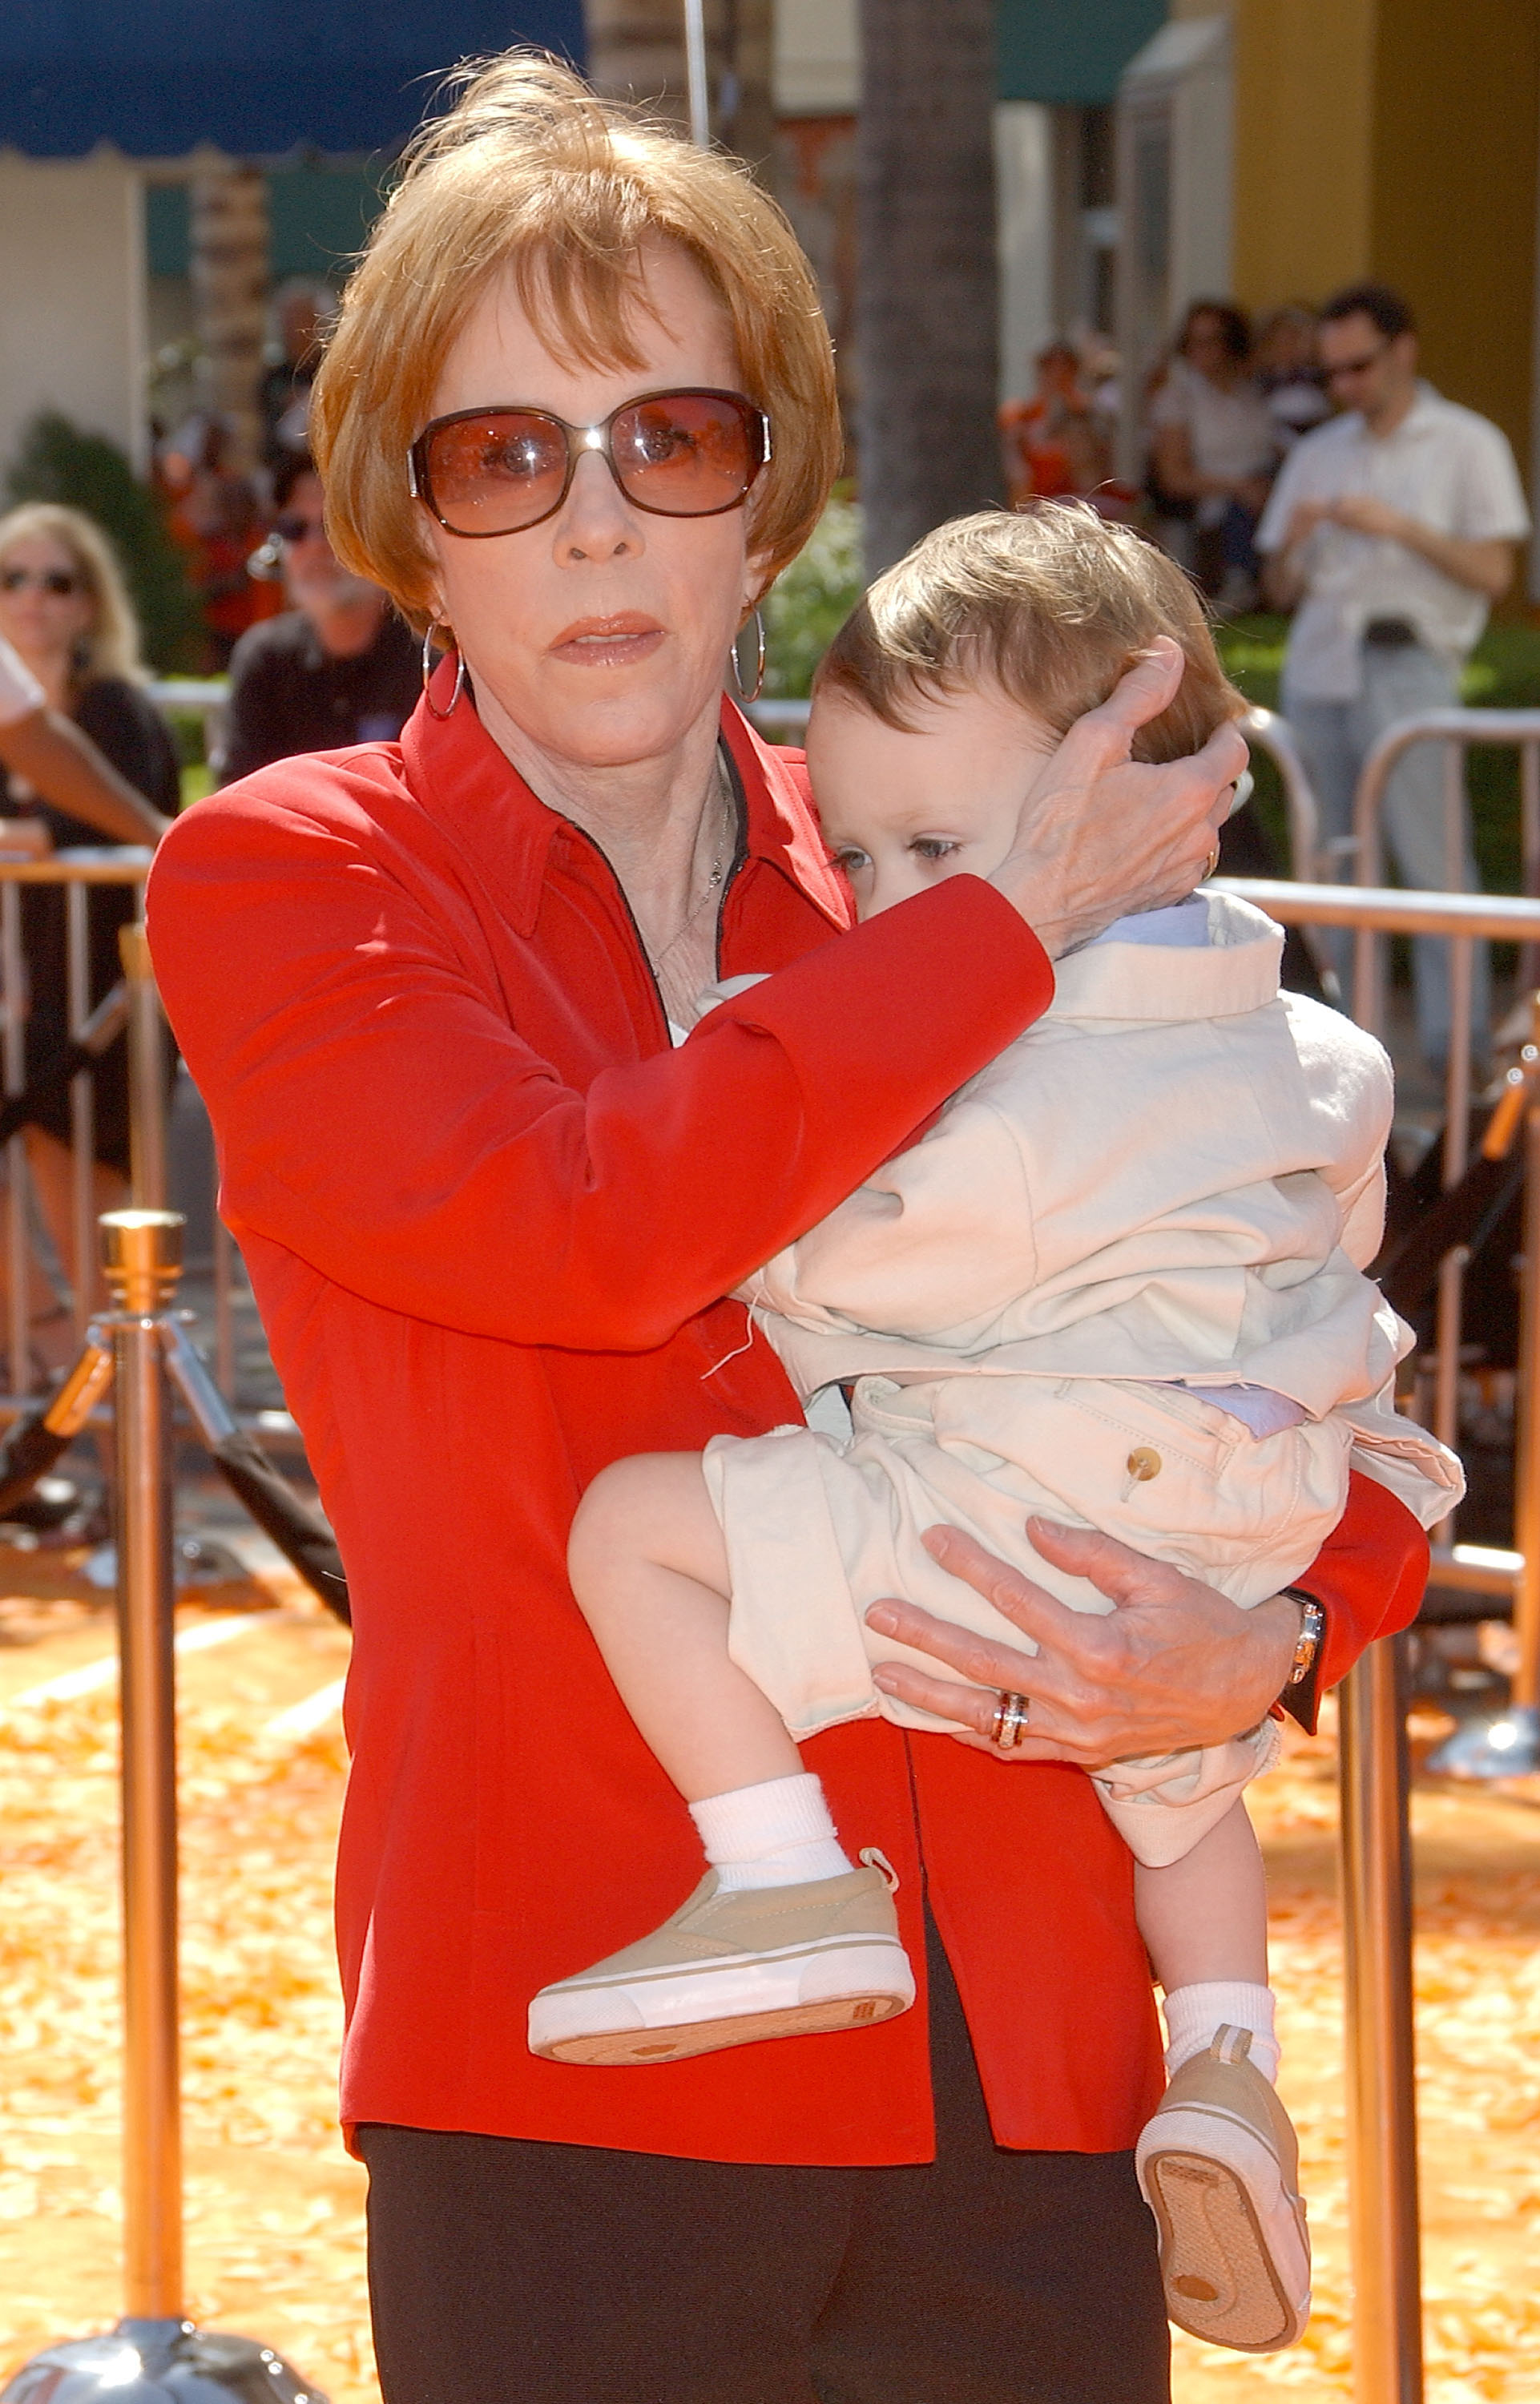 Carol Burnett and her grandson, Dylan, at the "Horton Hears Who" premiere in March 2003 | Source: Getty Images